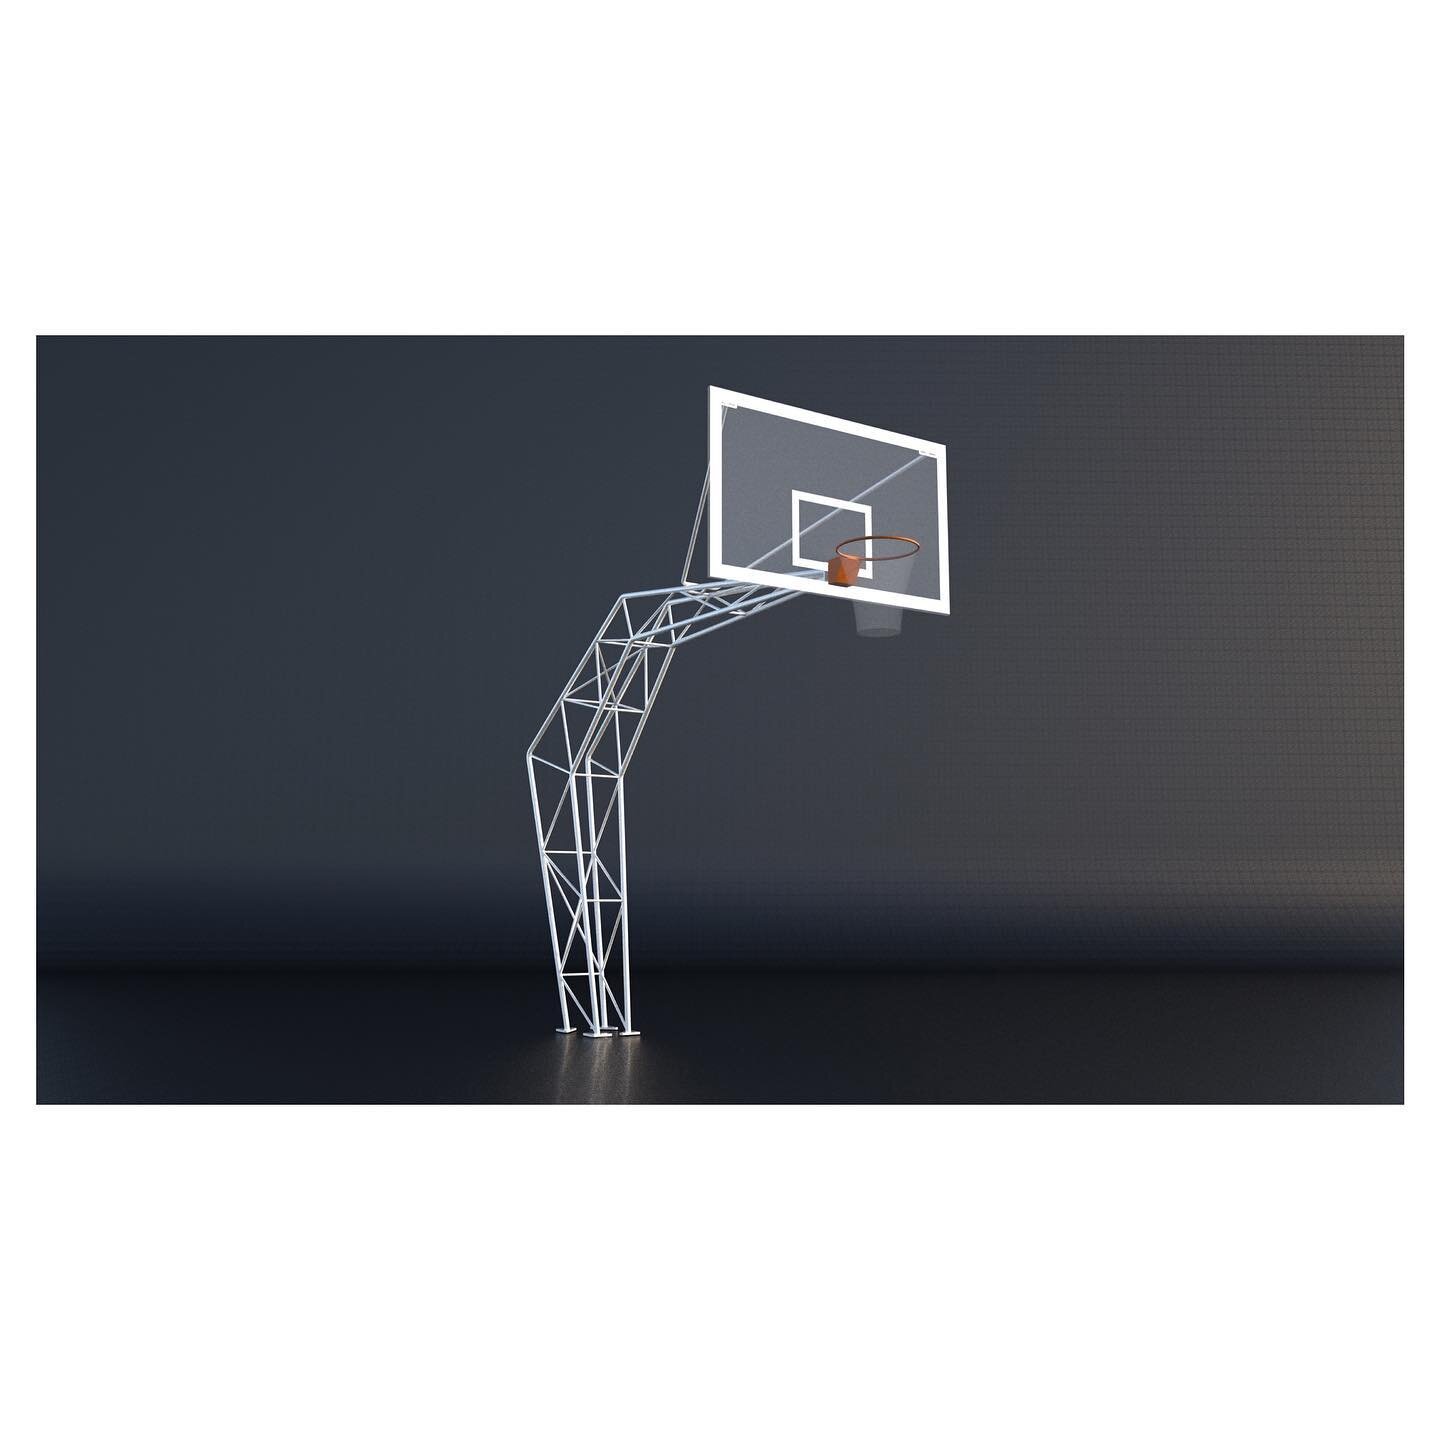 Hoop dreams 🏀
.
A one-off, climbing-friendly basketball stanchion design created for a temporary city space project developed with Primus Architects for Carlsberg back in 2010 (also known for the legendary Rail Heaven  spot).
.
More on this project 